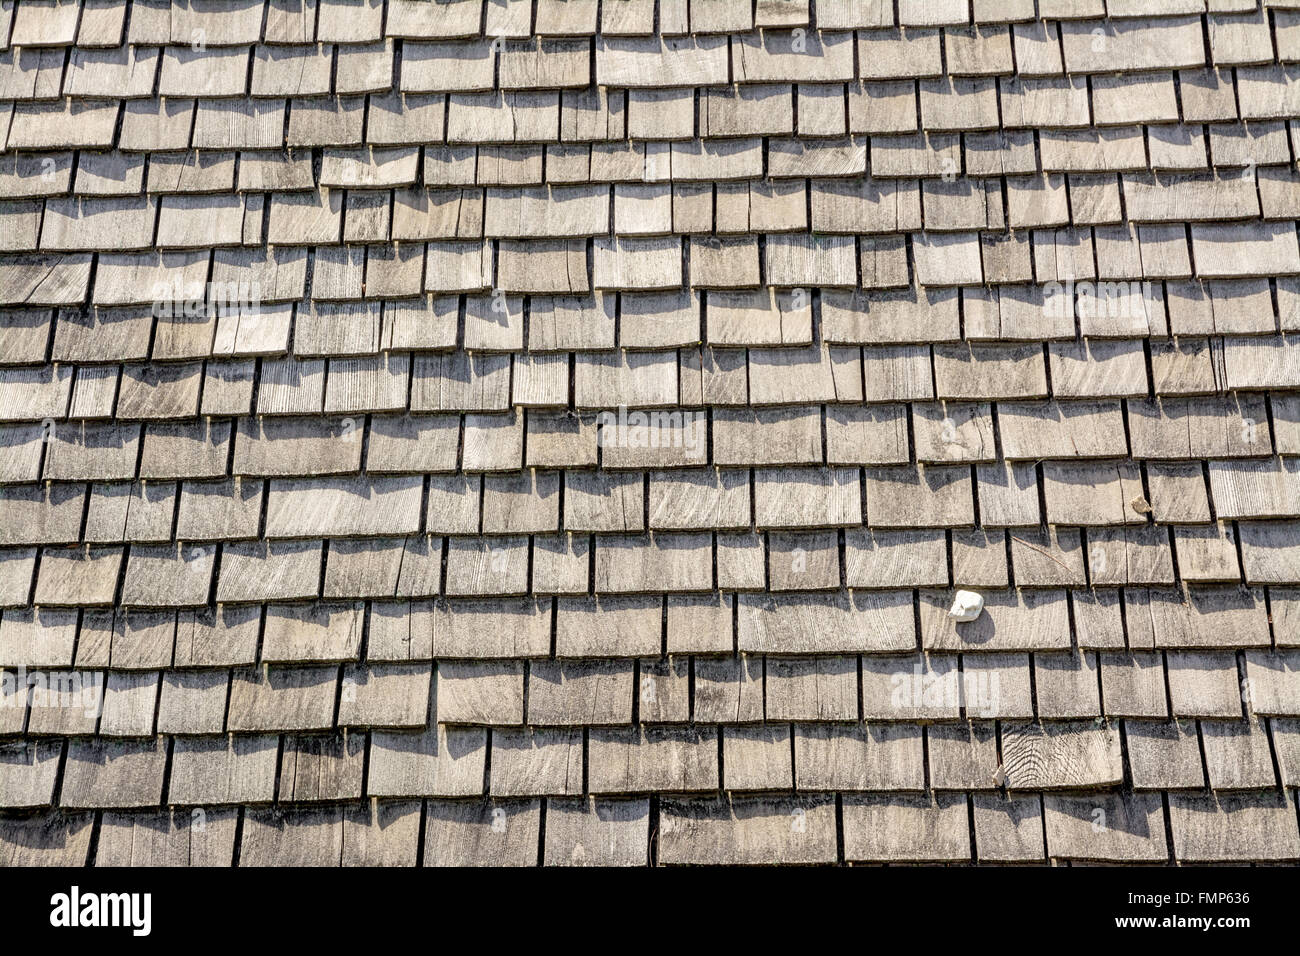 Wood roof shingles with a stone Stock Photo